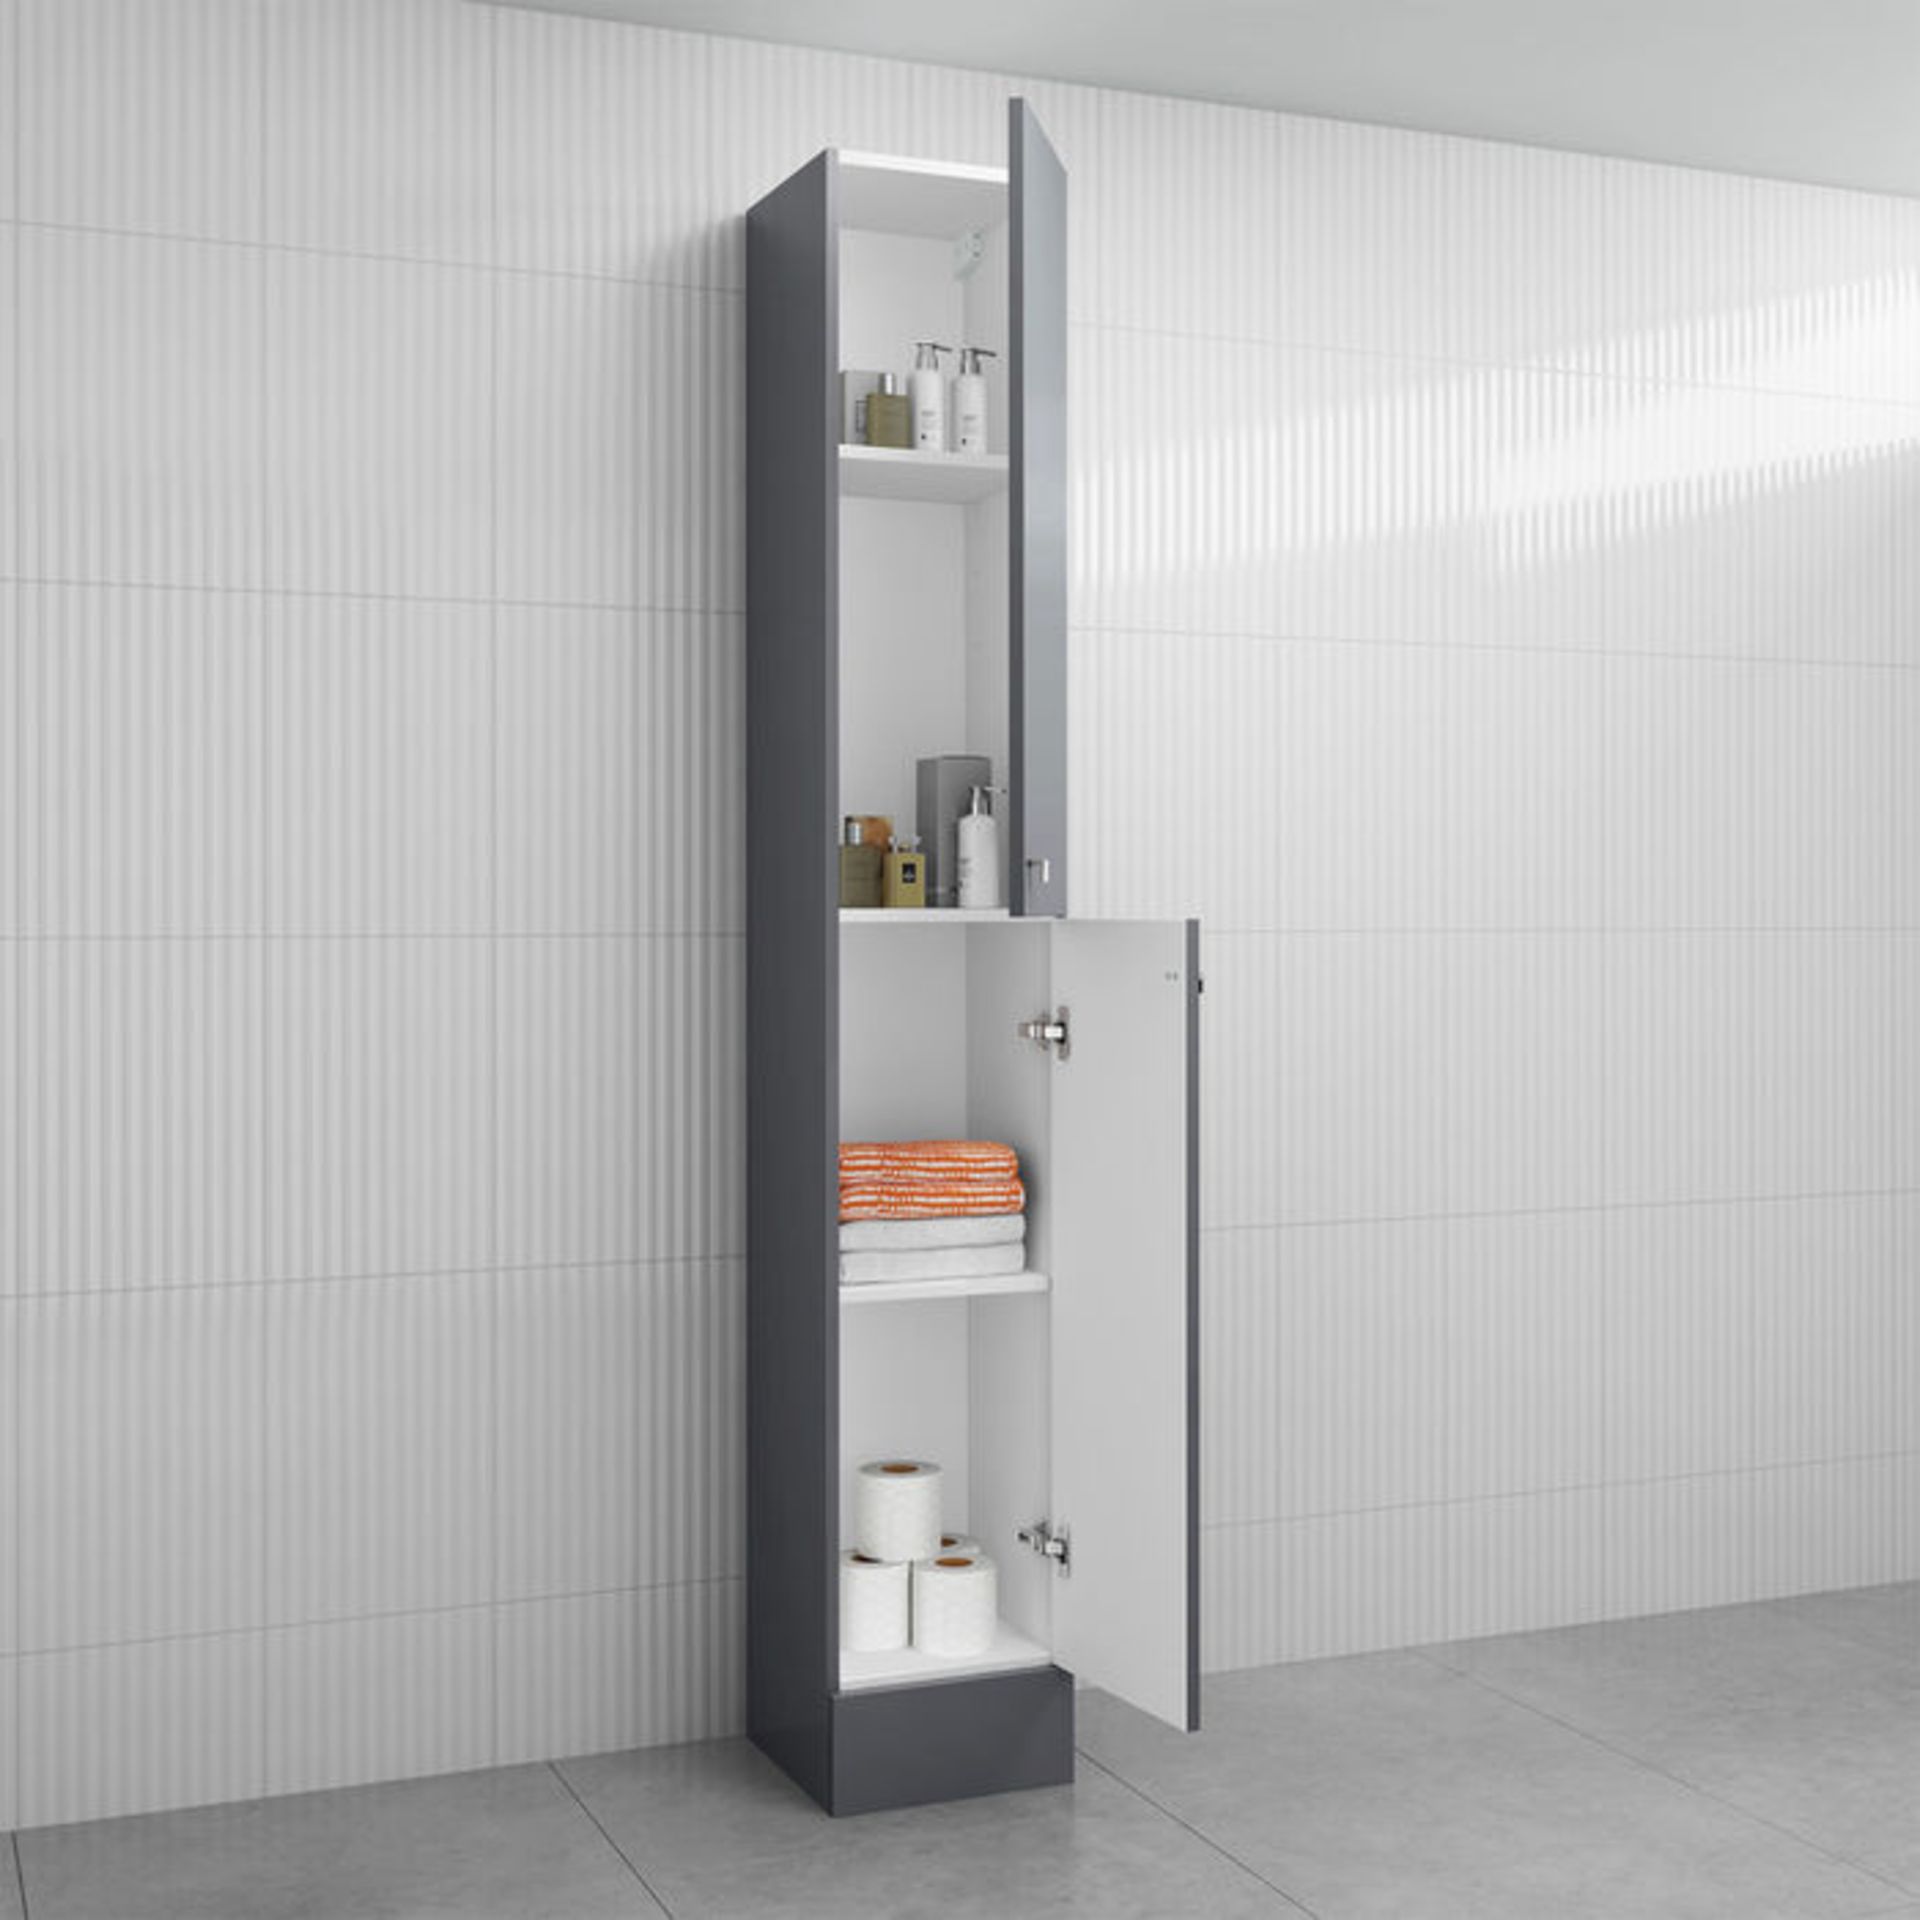 (NY77) 1900x300mm Harper Gloss Grey Tall Storage Cabinet - Floor Standing. RRP £199.99. Our tall - Image 2 of 5